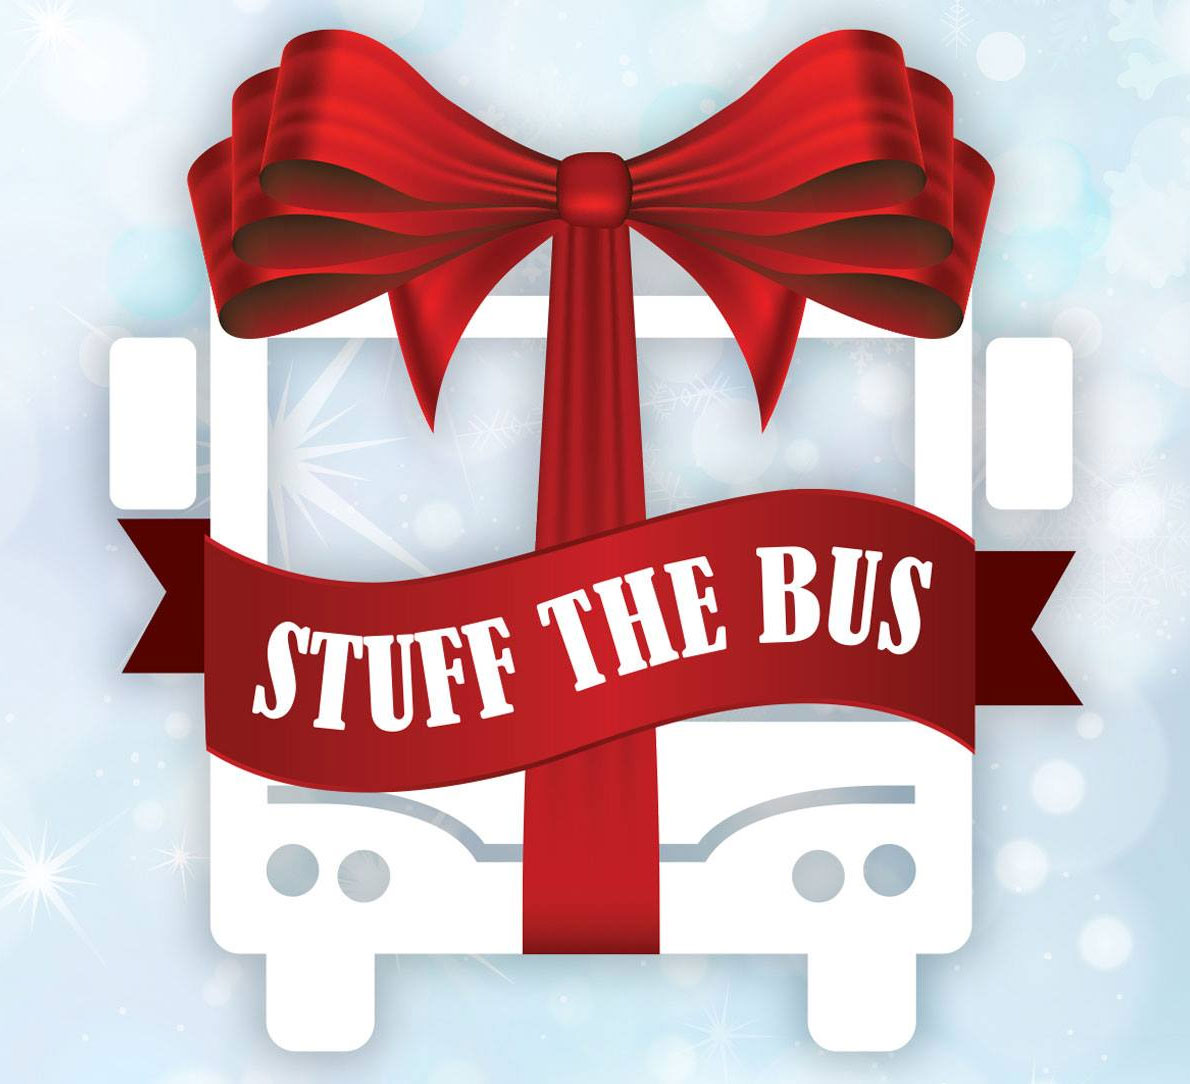 Foxwoods Annual “Stuff The Bus” Campaign